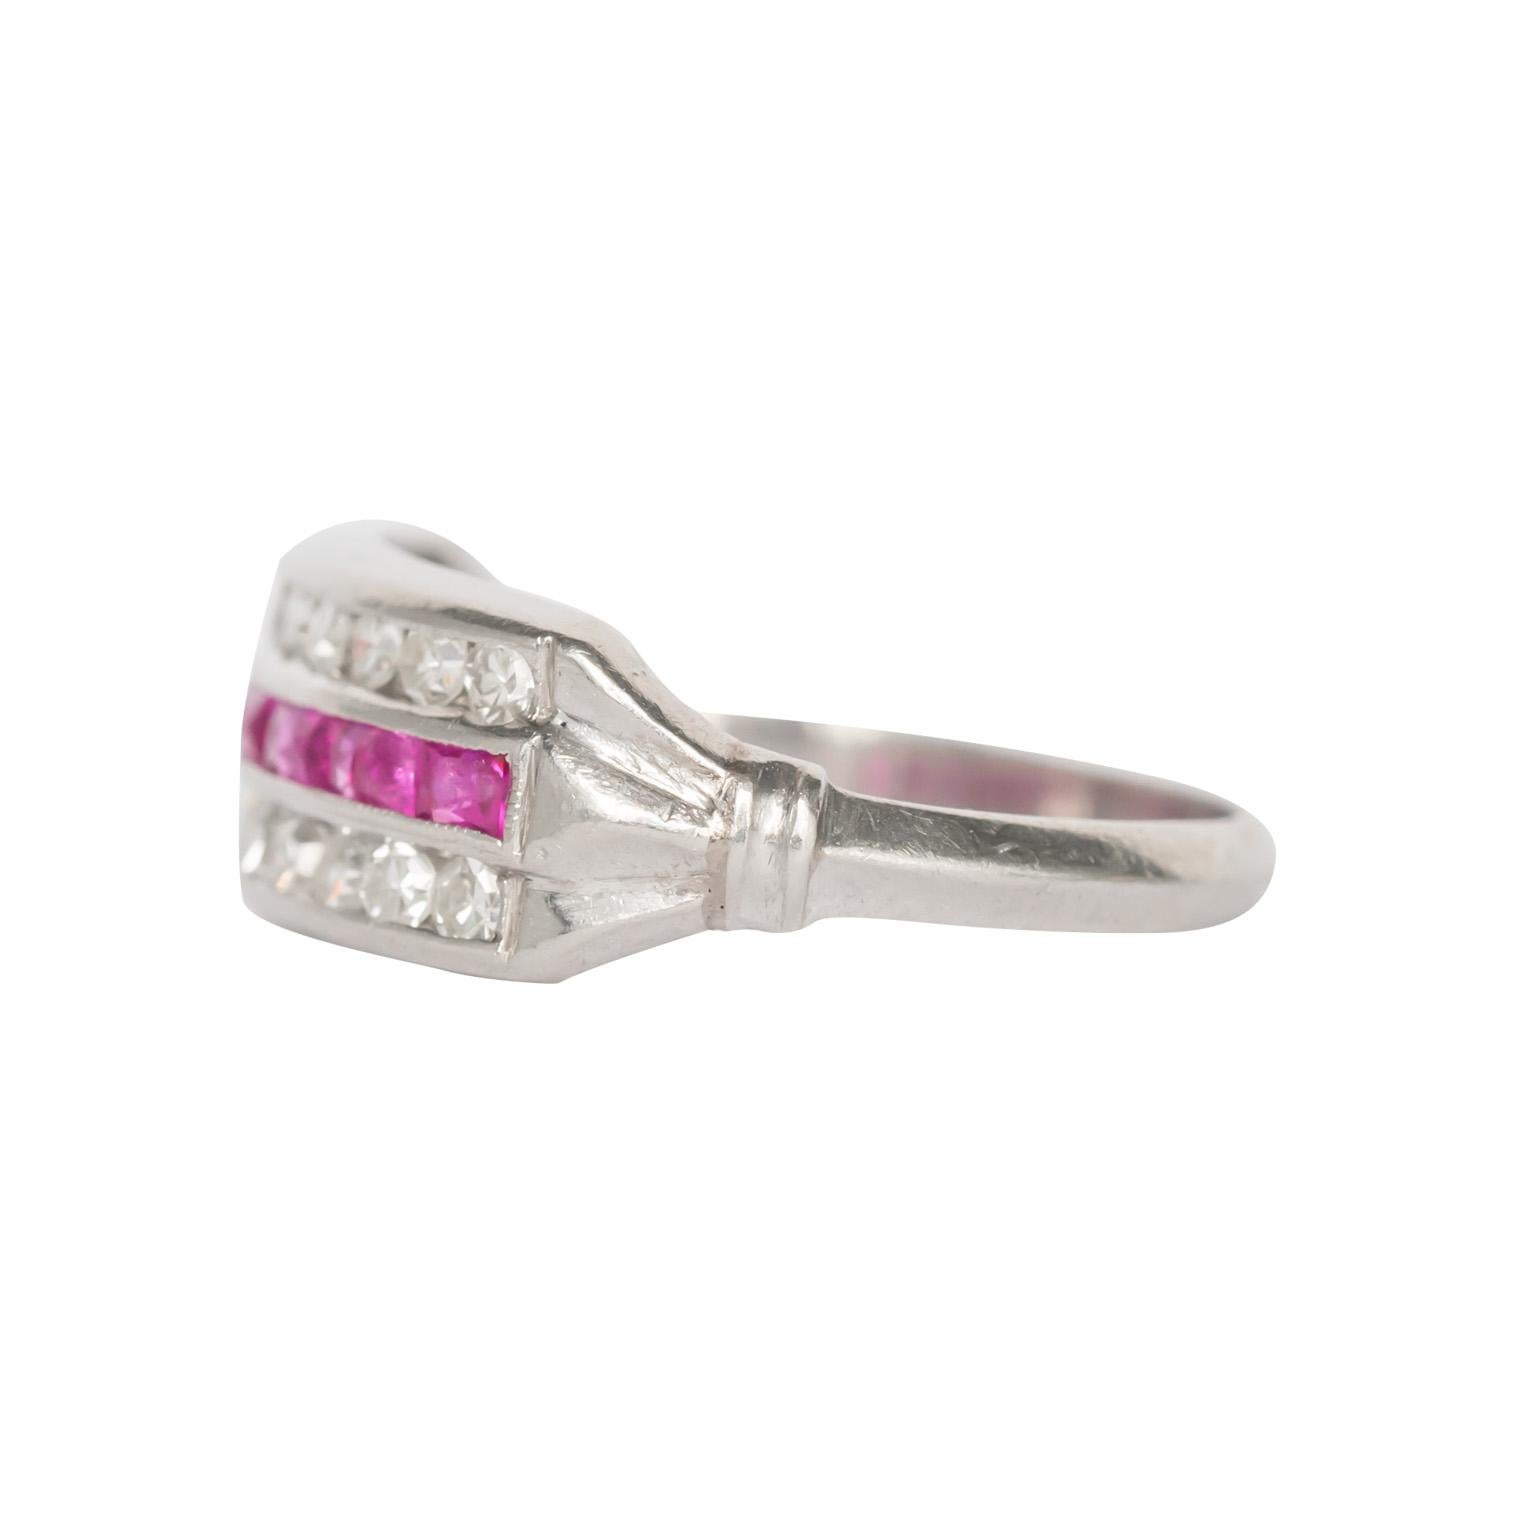 Item Details: 
Ring Size: 6
Metal Type: Platinum
Weight: 3.4 grams

Diamond Side Stone Details: 
Shape: Antique Single Cut
Total Carat Weight: .25 carat, total weight
Color: F
Clarity: VS

Color Stone Details: 
Type: Natural Ruby
Shape: French